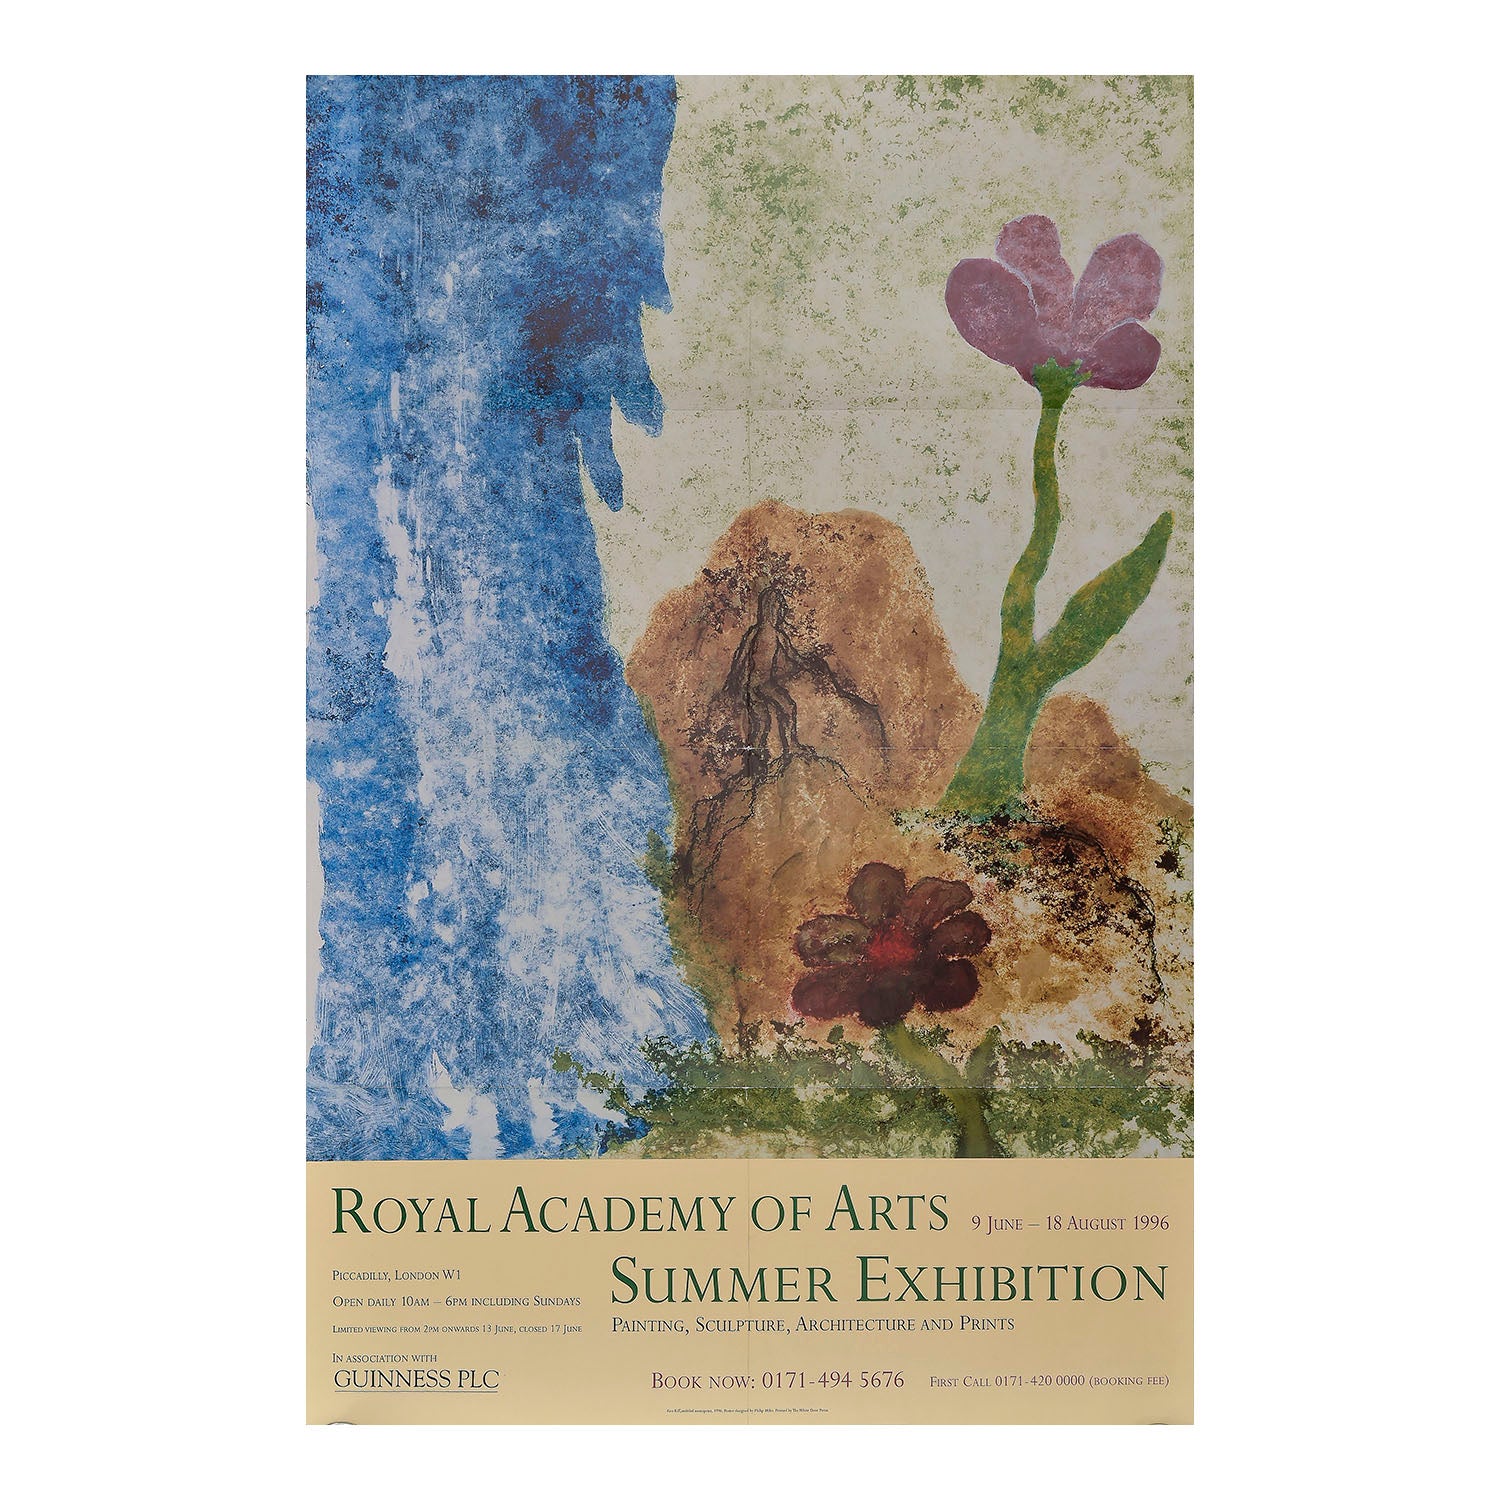 original poster, for the Royal Academy Summer Exhibition in 1996 featuring an original artwork by Ken Kiff RA (1935 – 2001) with layout design by Philip Miles